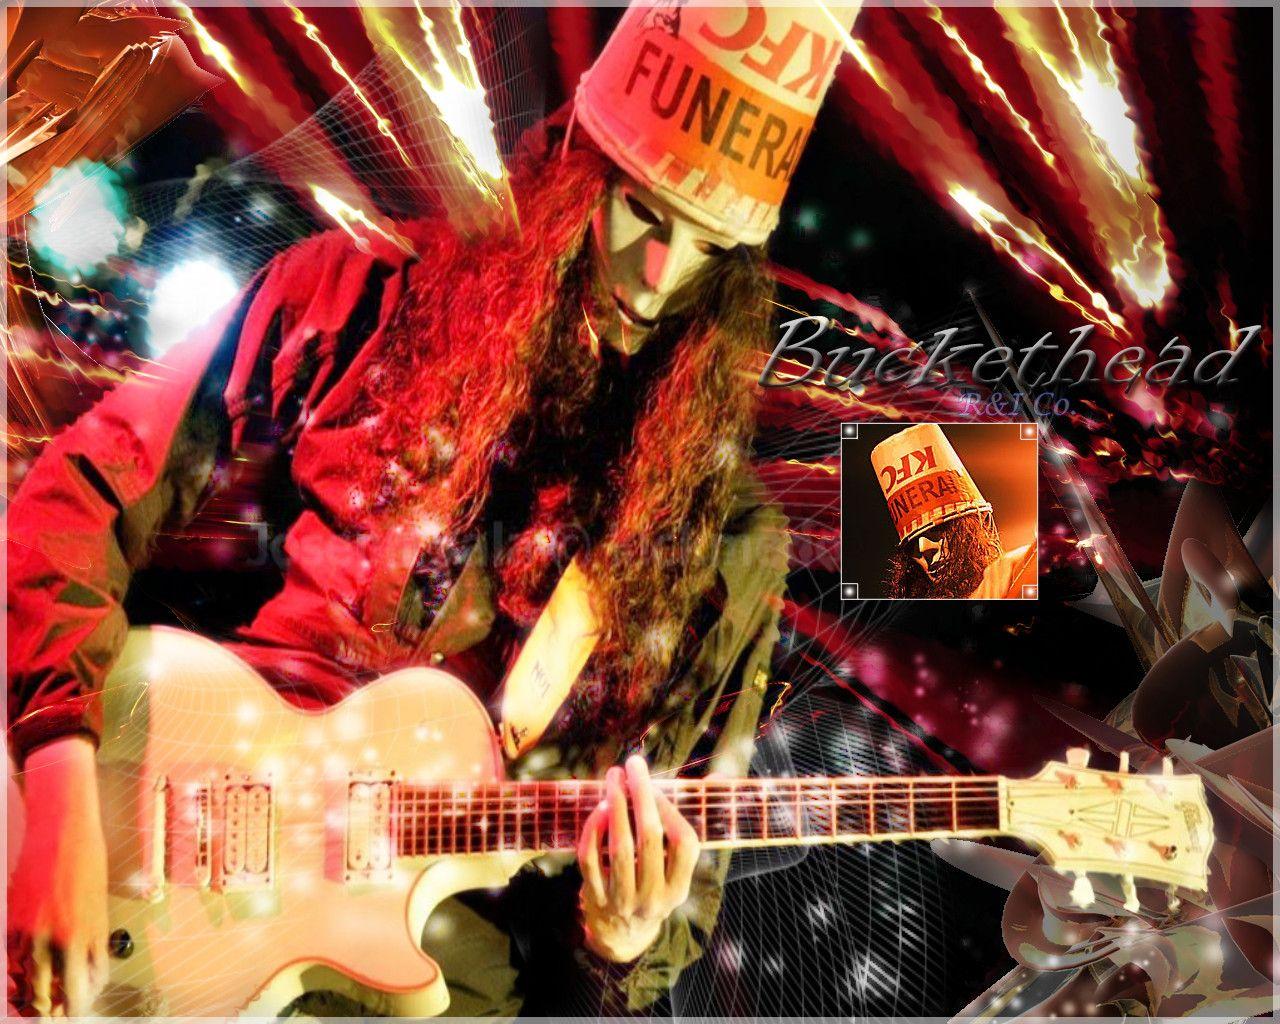 Buckethead Wallpapers and Backgrounds Image.